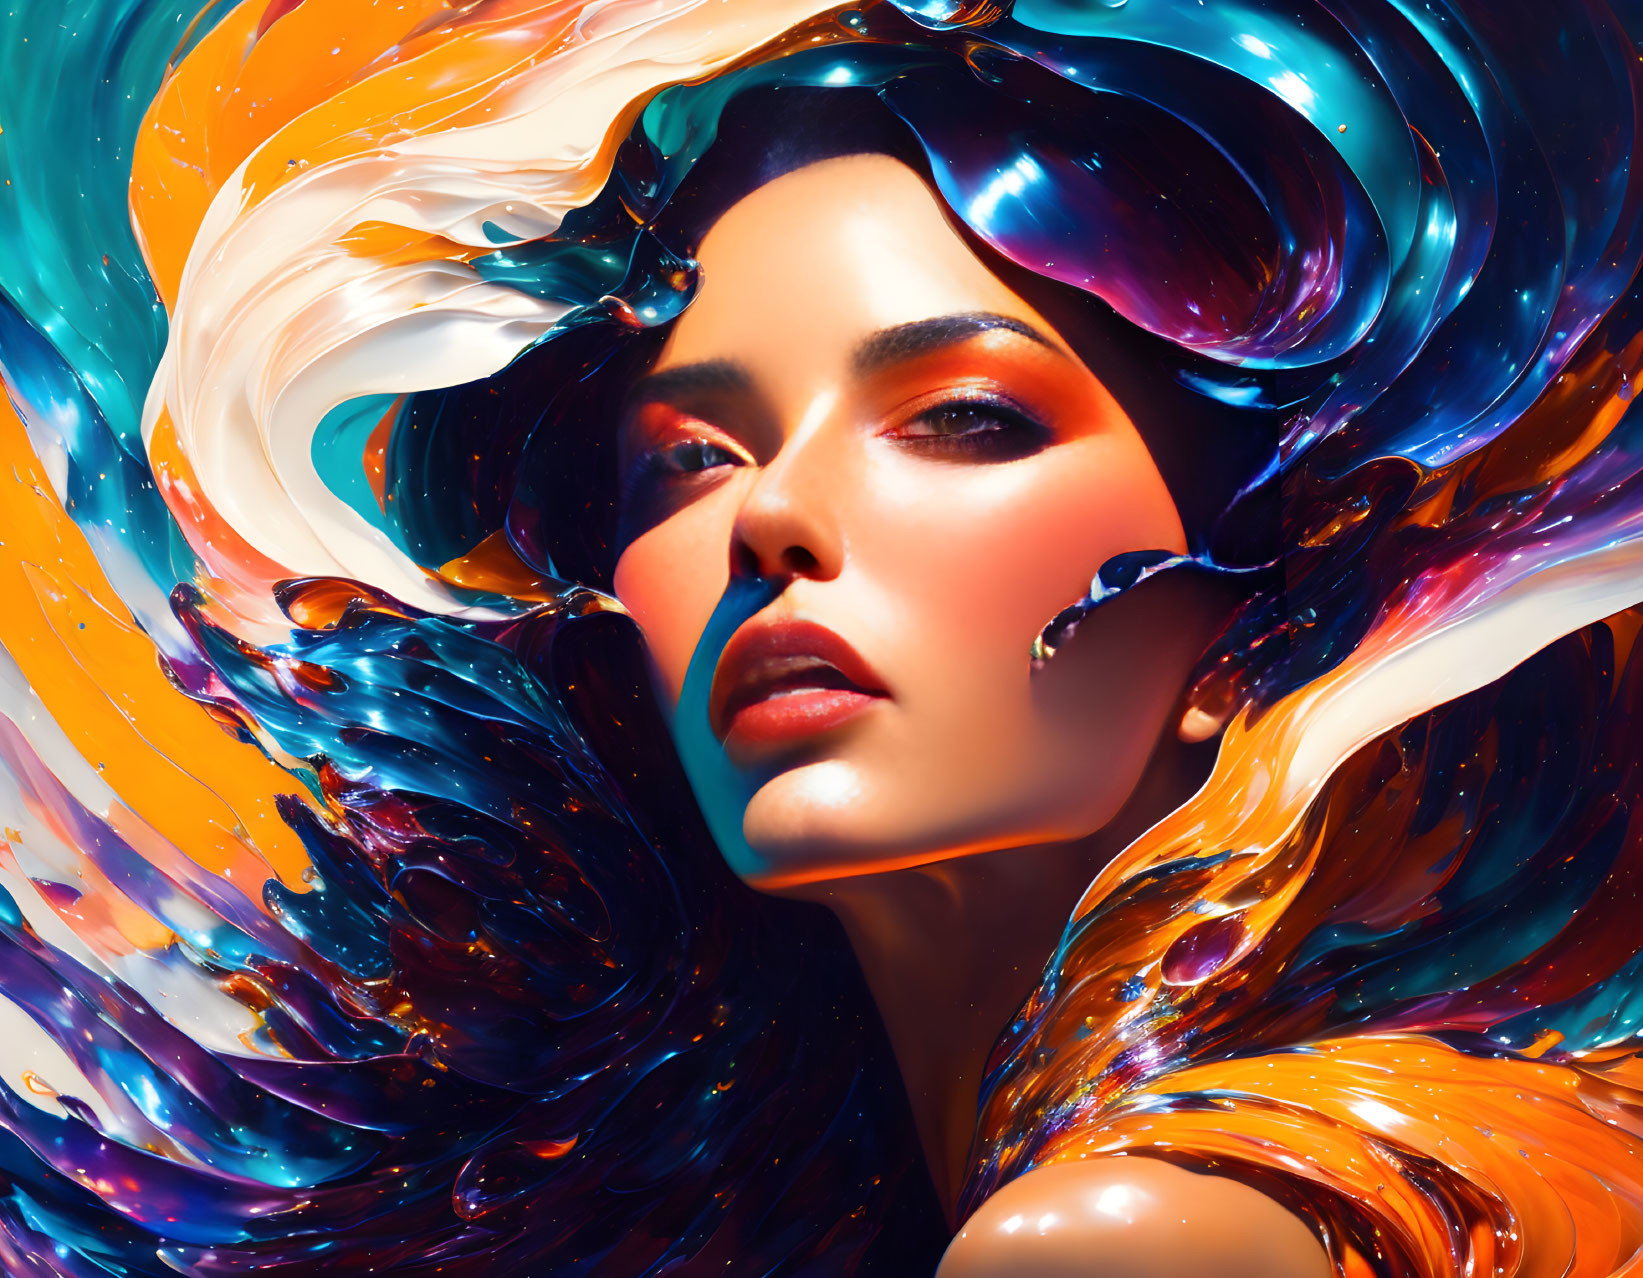 Colorful Abstract Art: Woman with Flowing Hair and Feathers